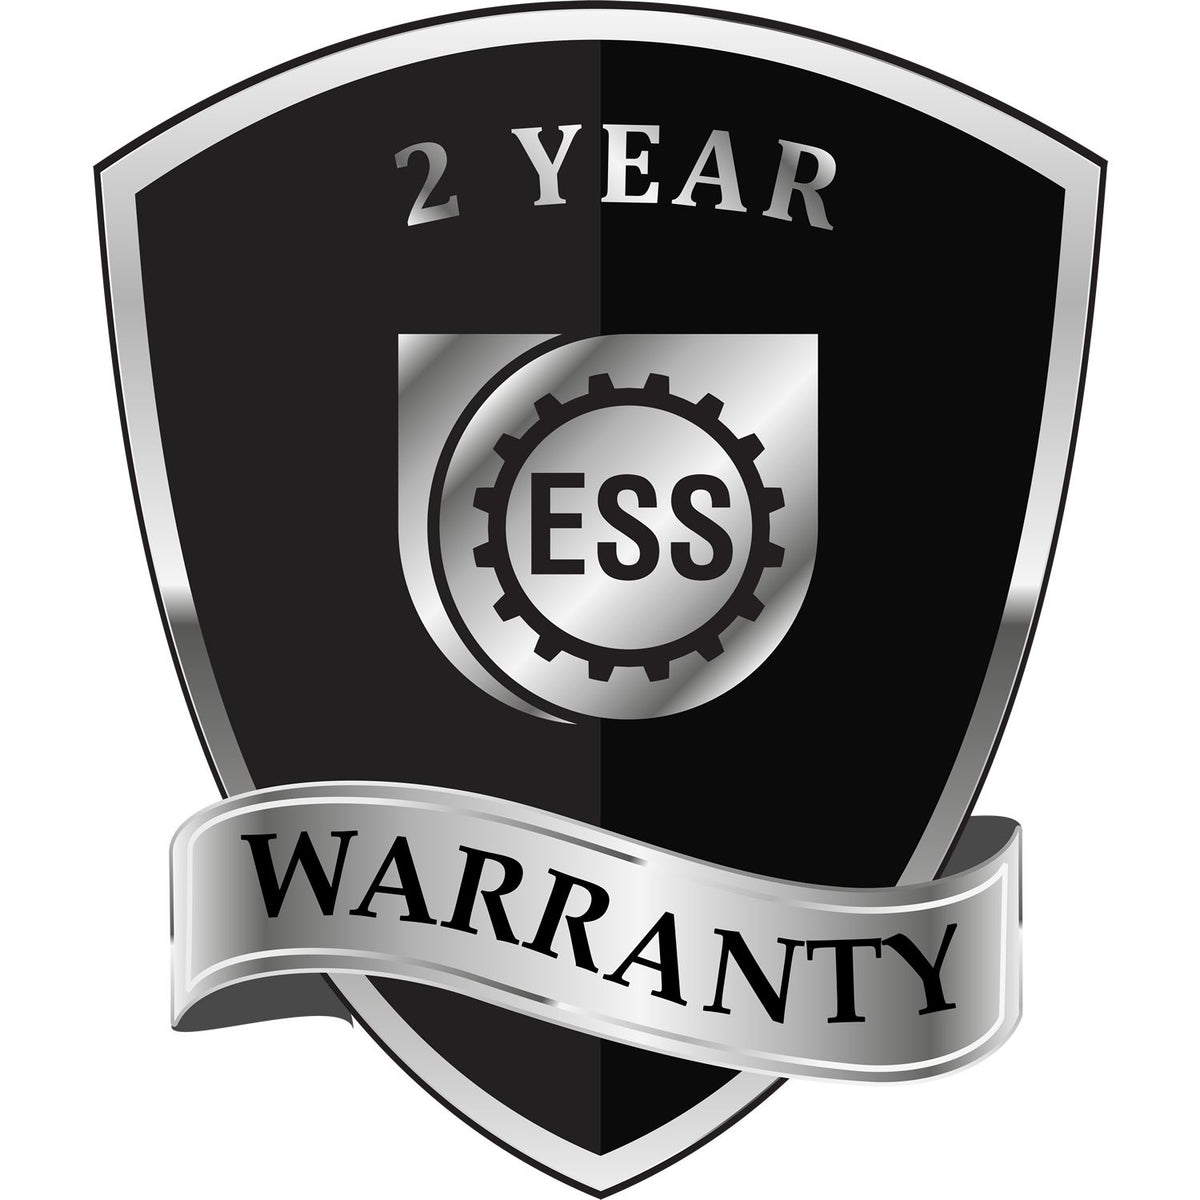 A black and silver badge or emblem showing warranty information for the Hybrid District of Columbia Architect Seal